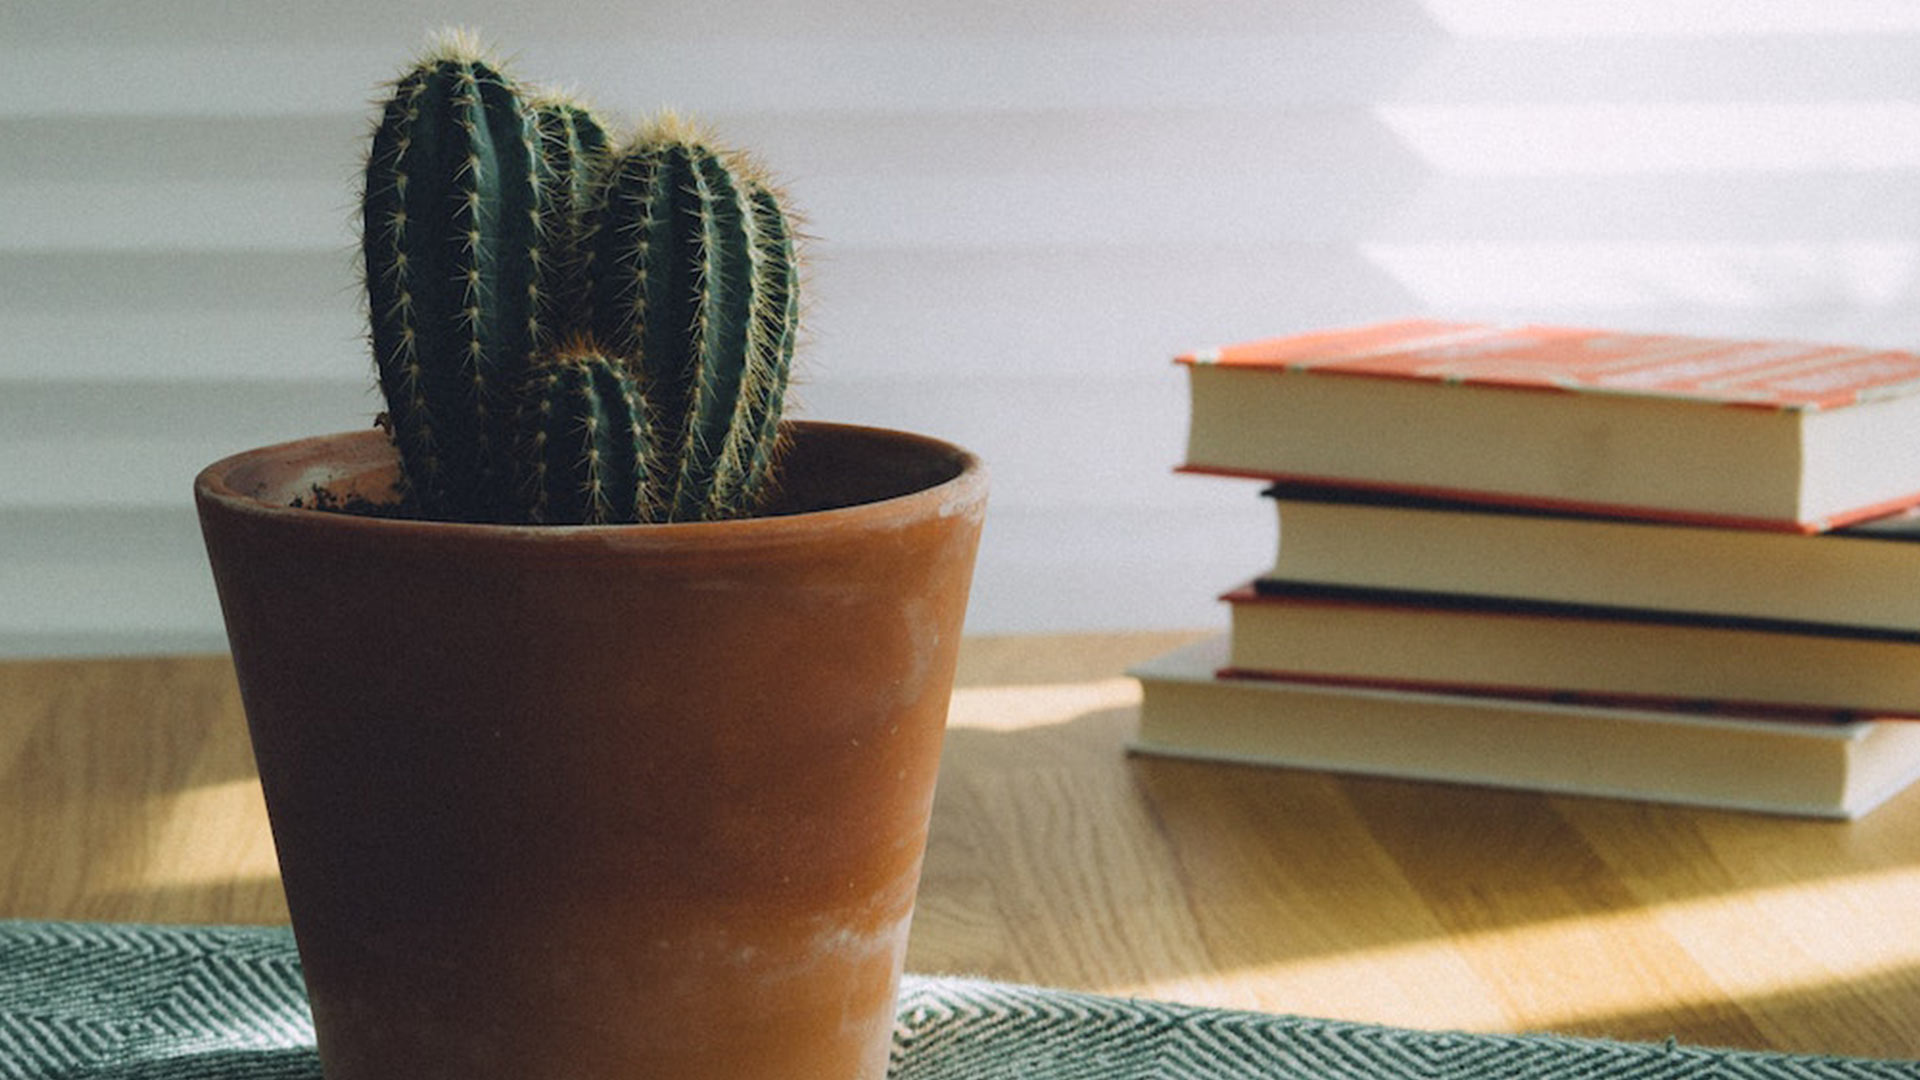 stack-of-books-with-cactus-plant